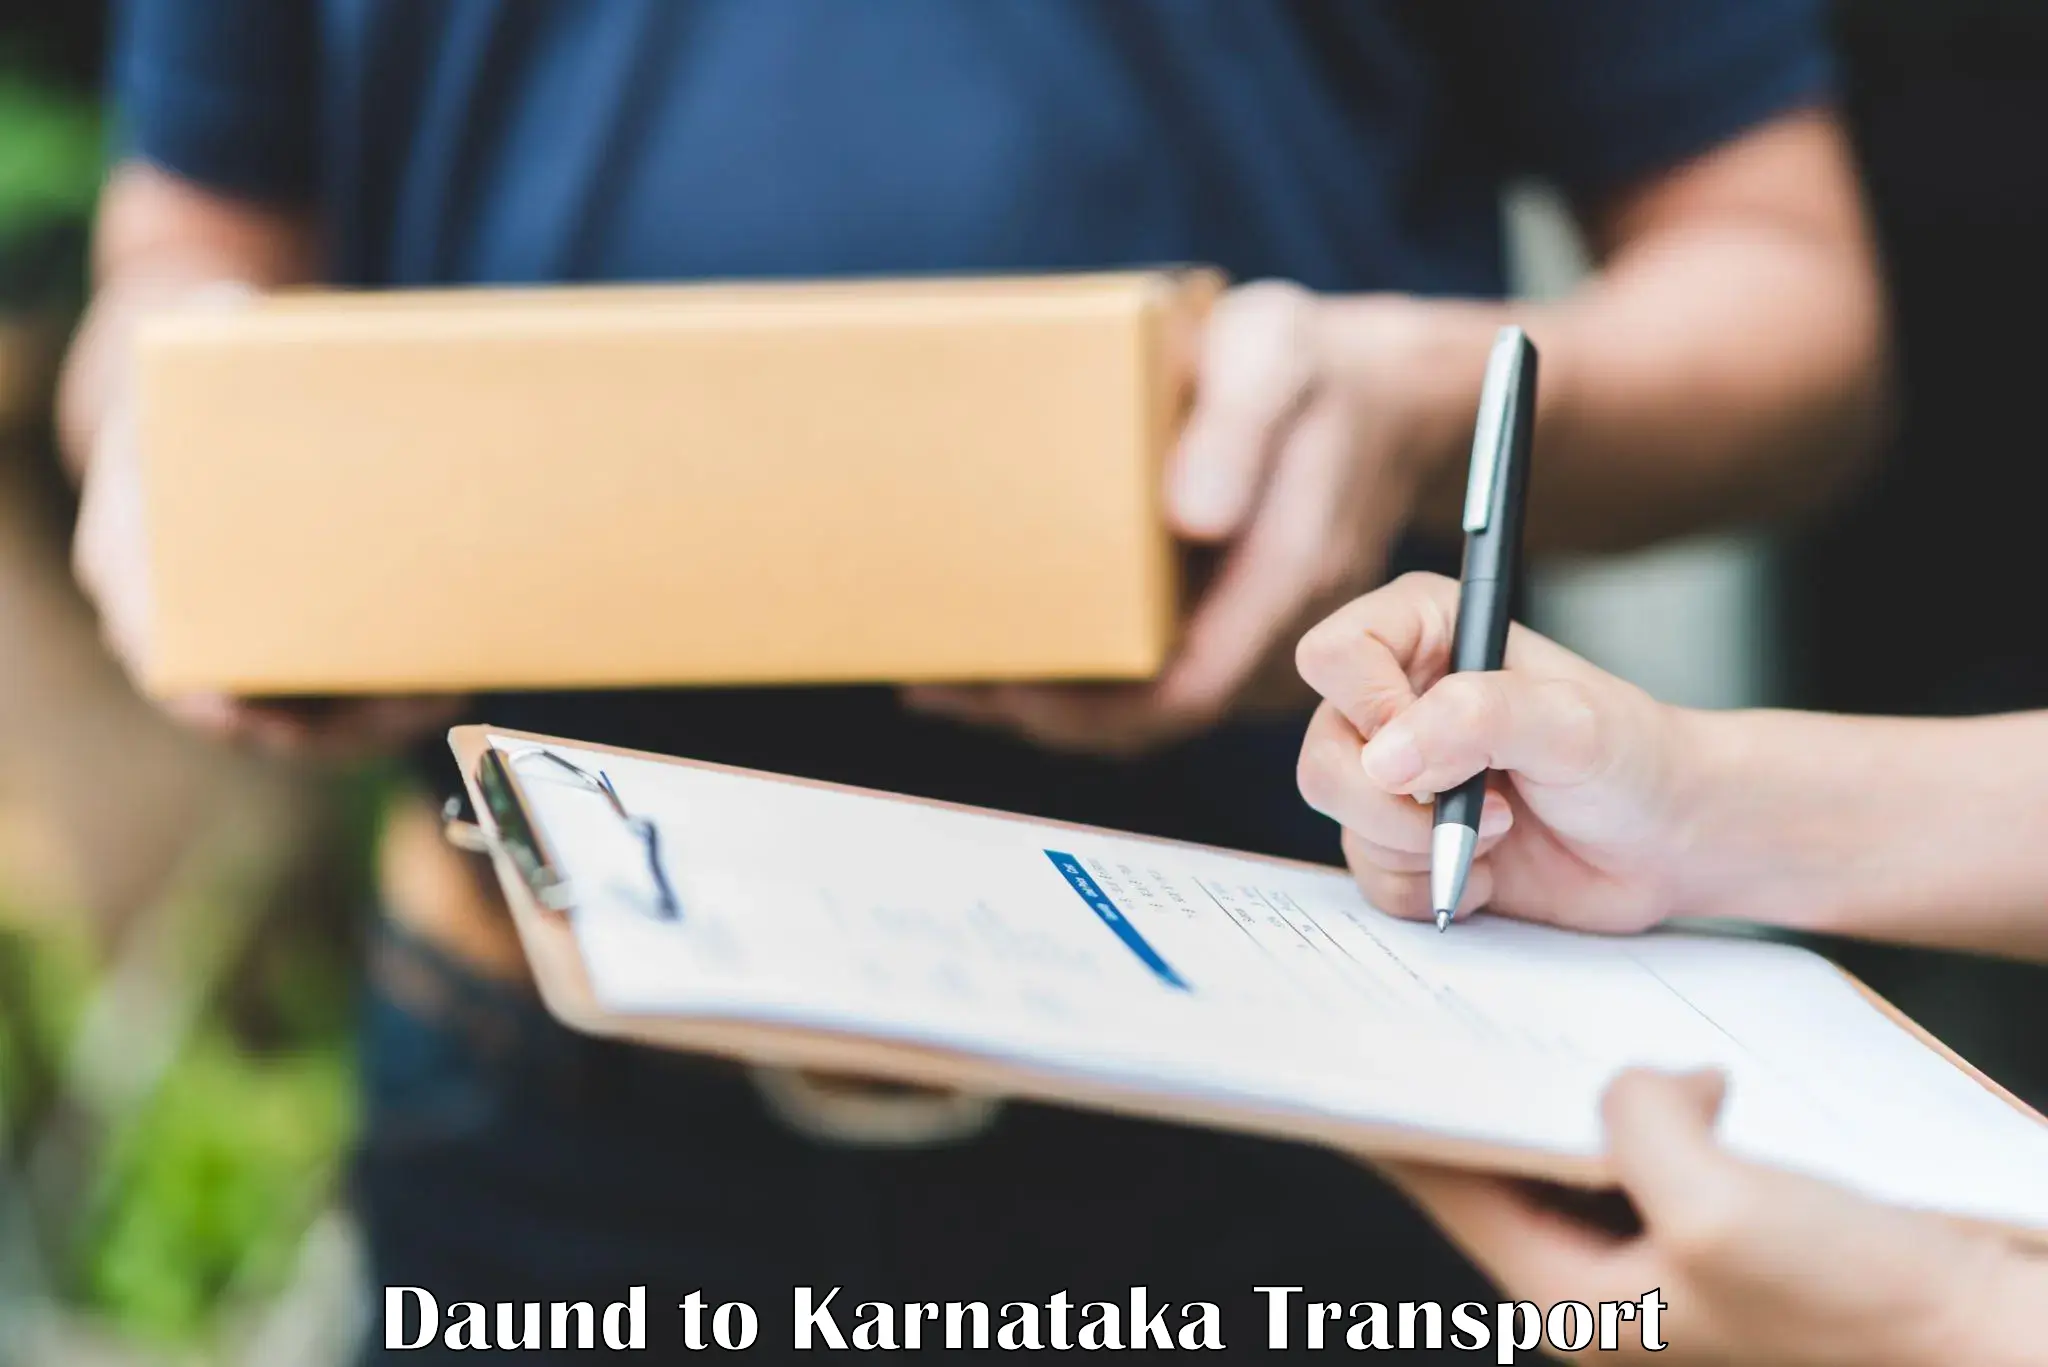 All India transport service Daund to Manipal Academy of Higher Education